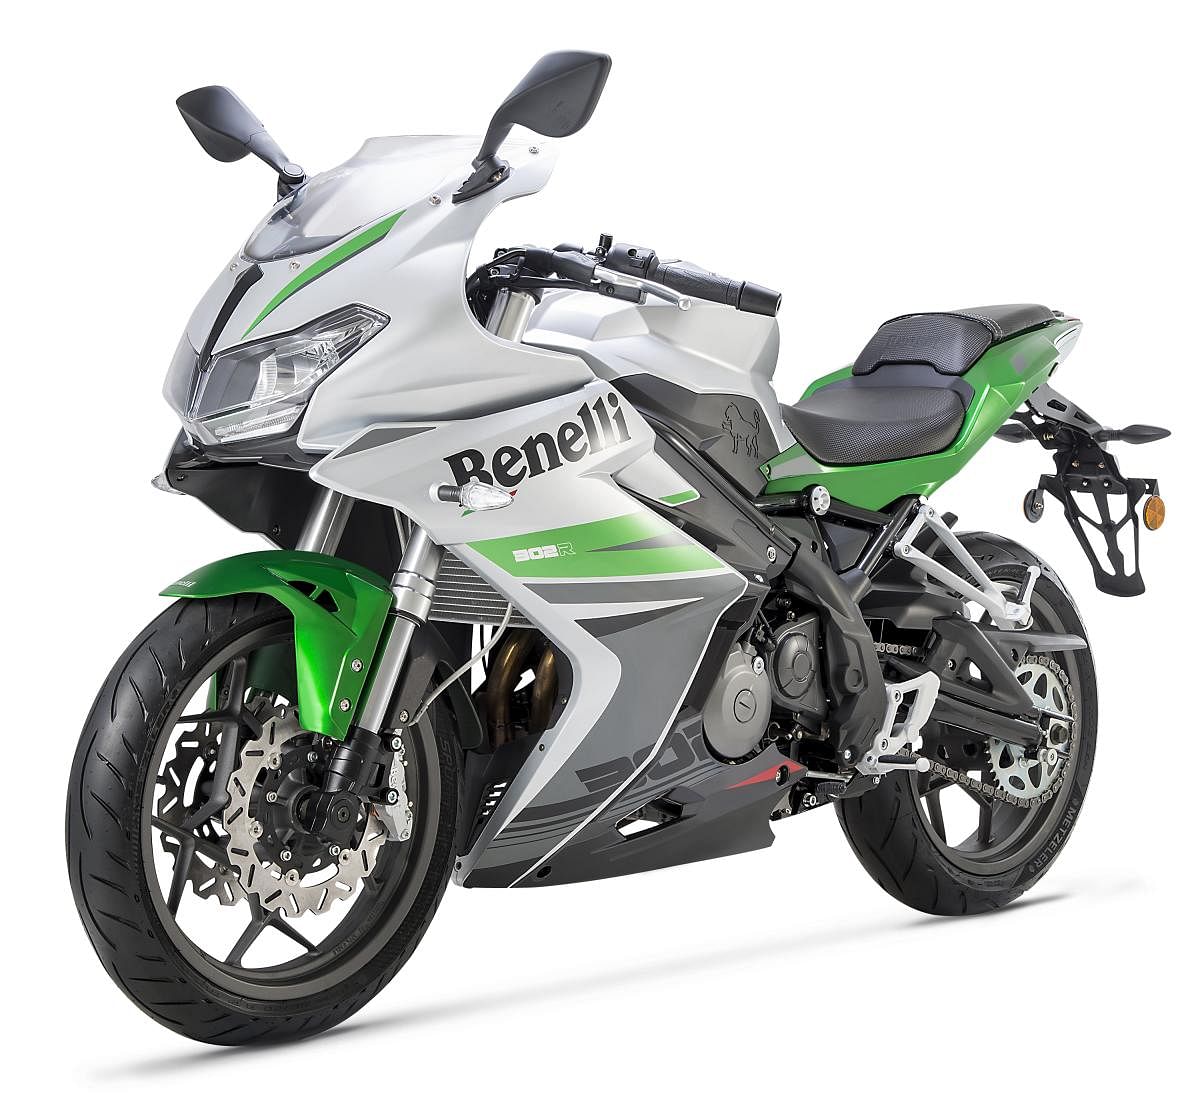 The TNT 300 now costs Rs. 2.99 lakhs. 